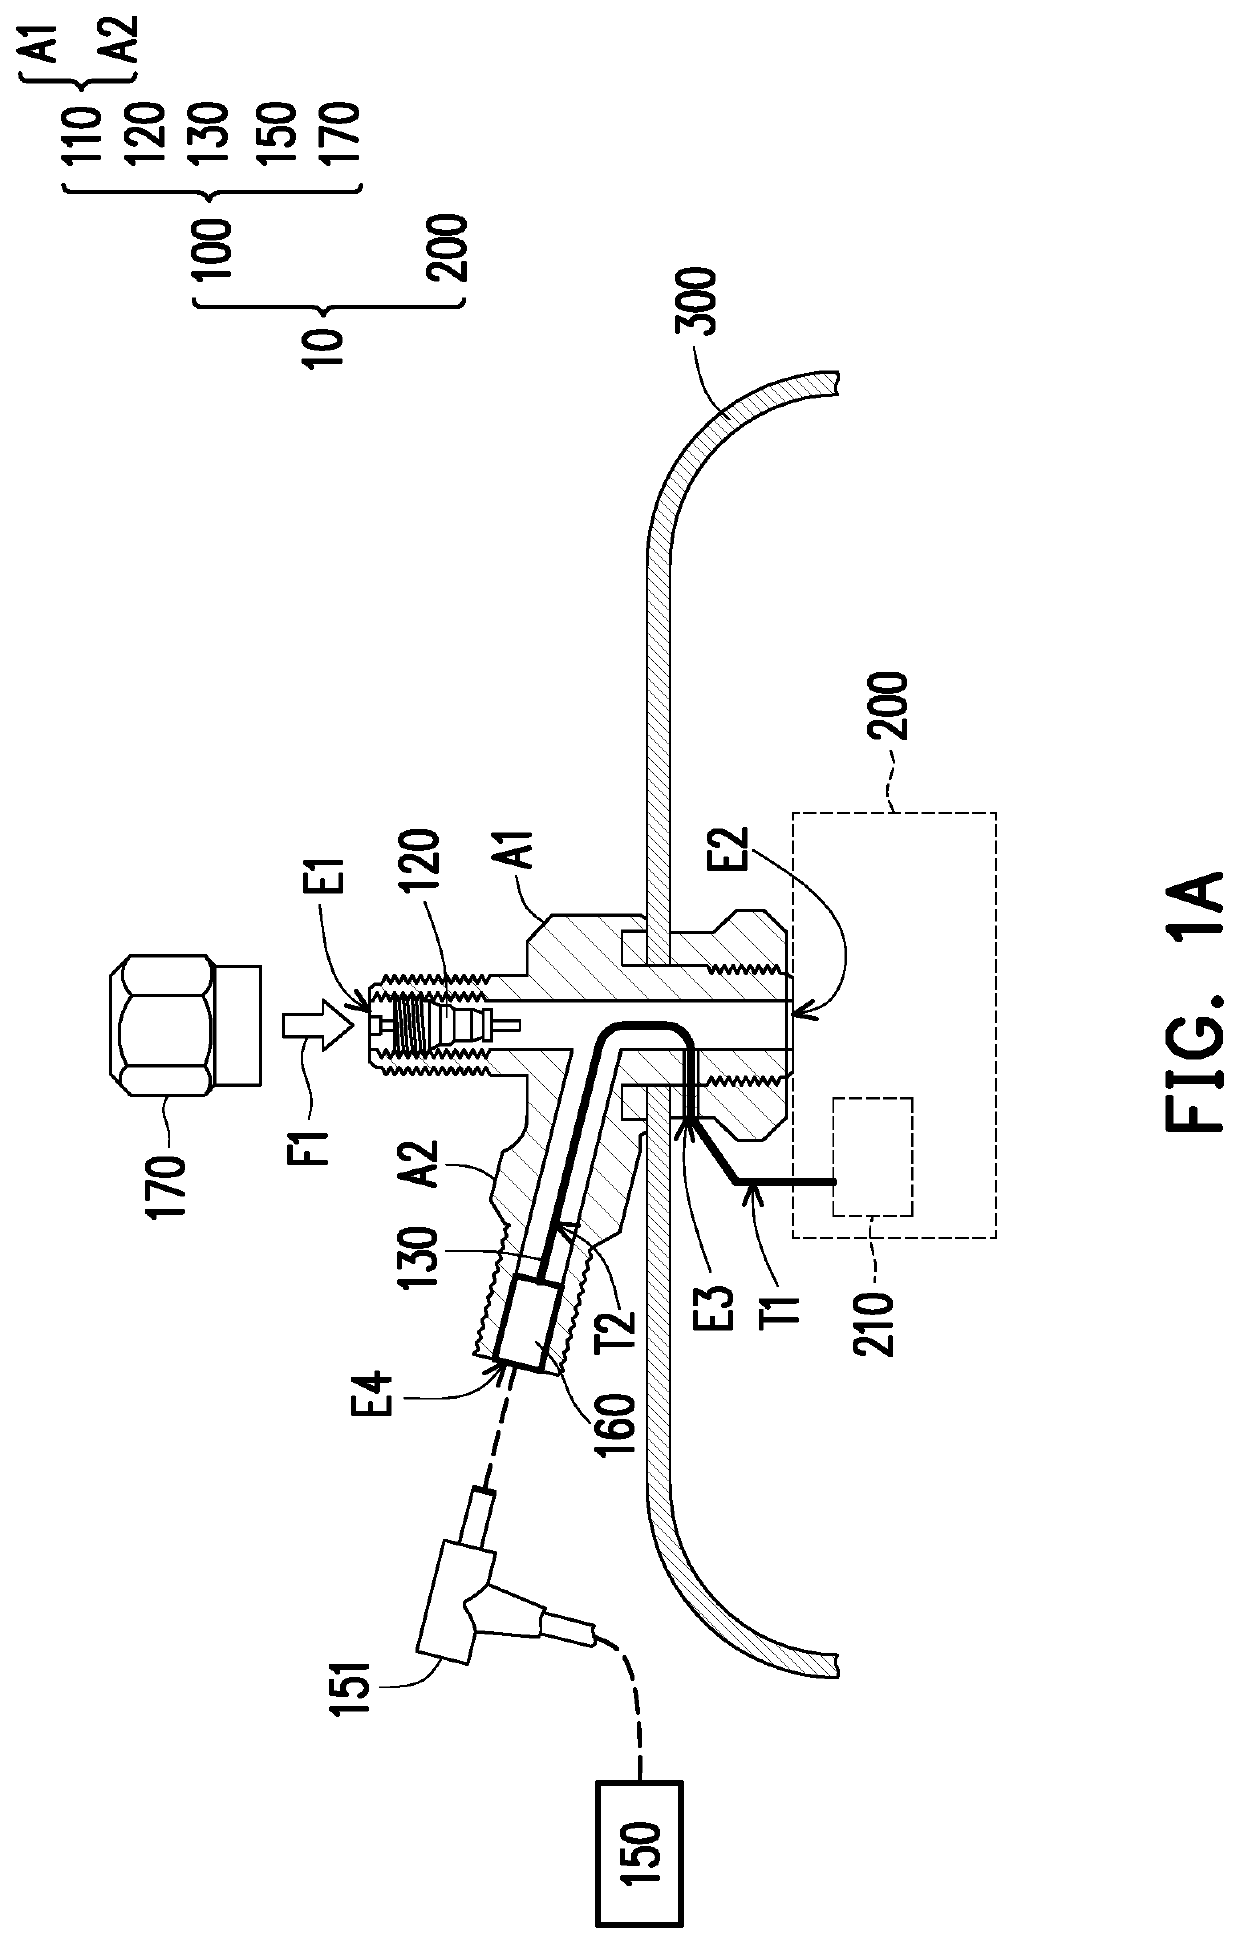 Valve stem structure and tire pressure monitoring system using the same